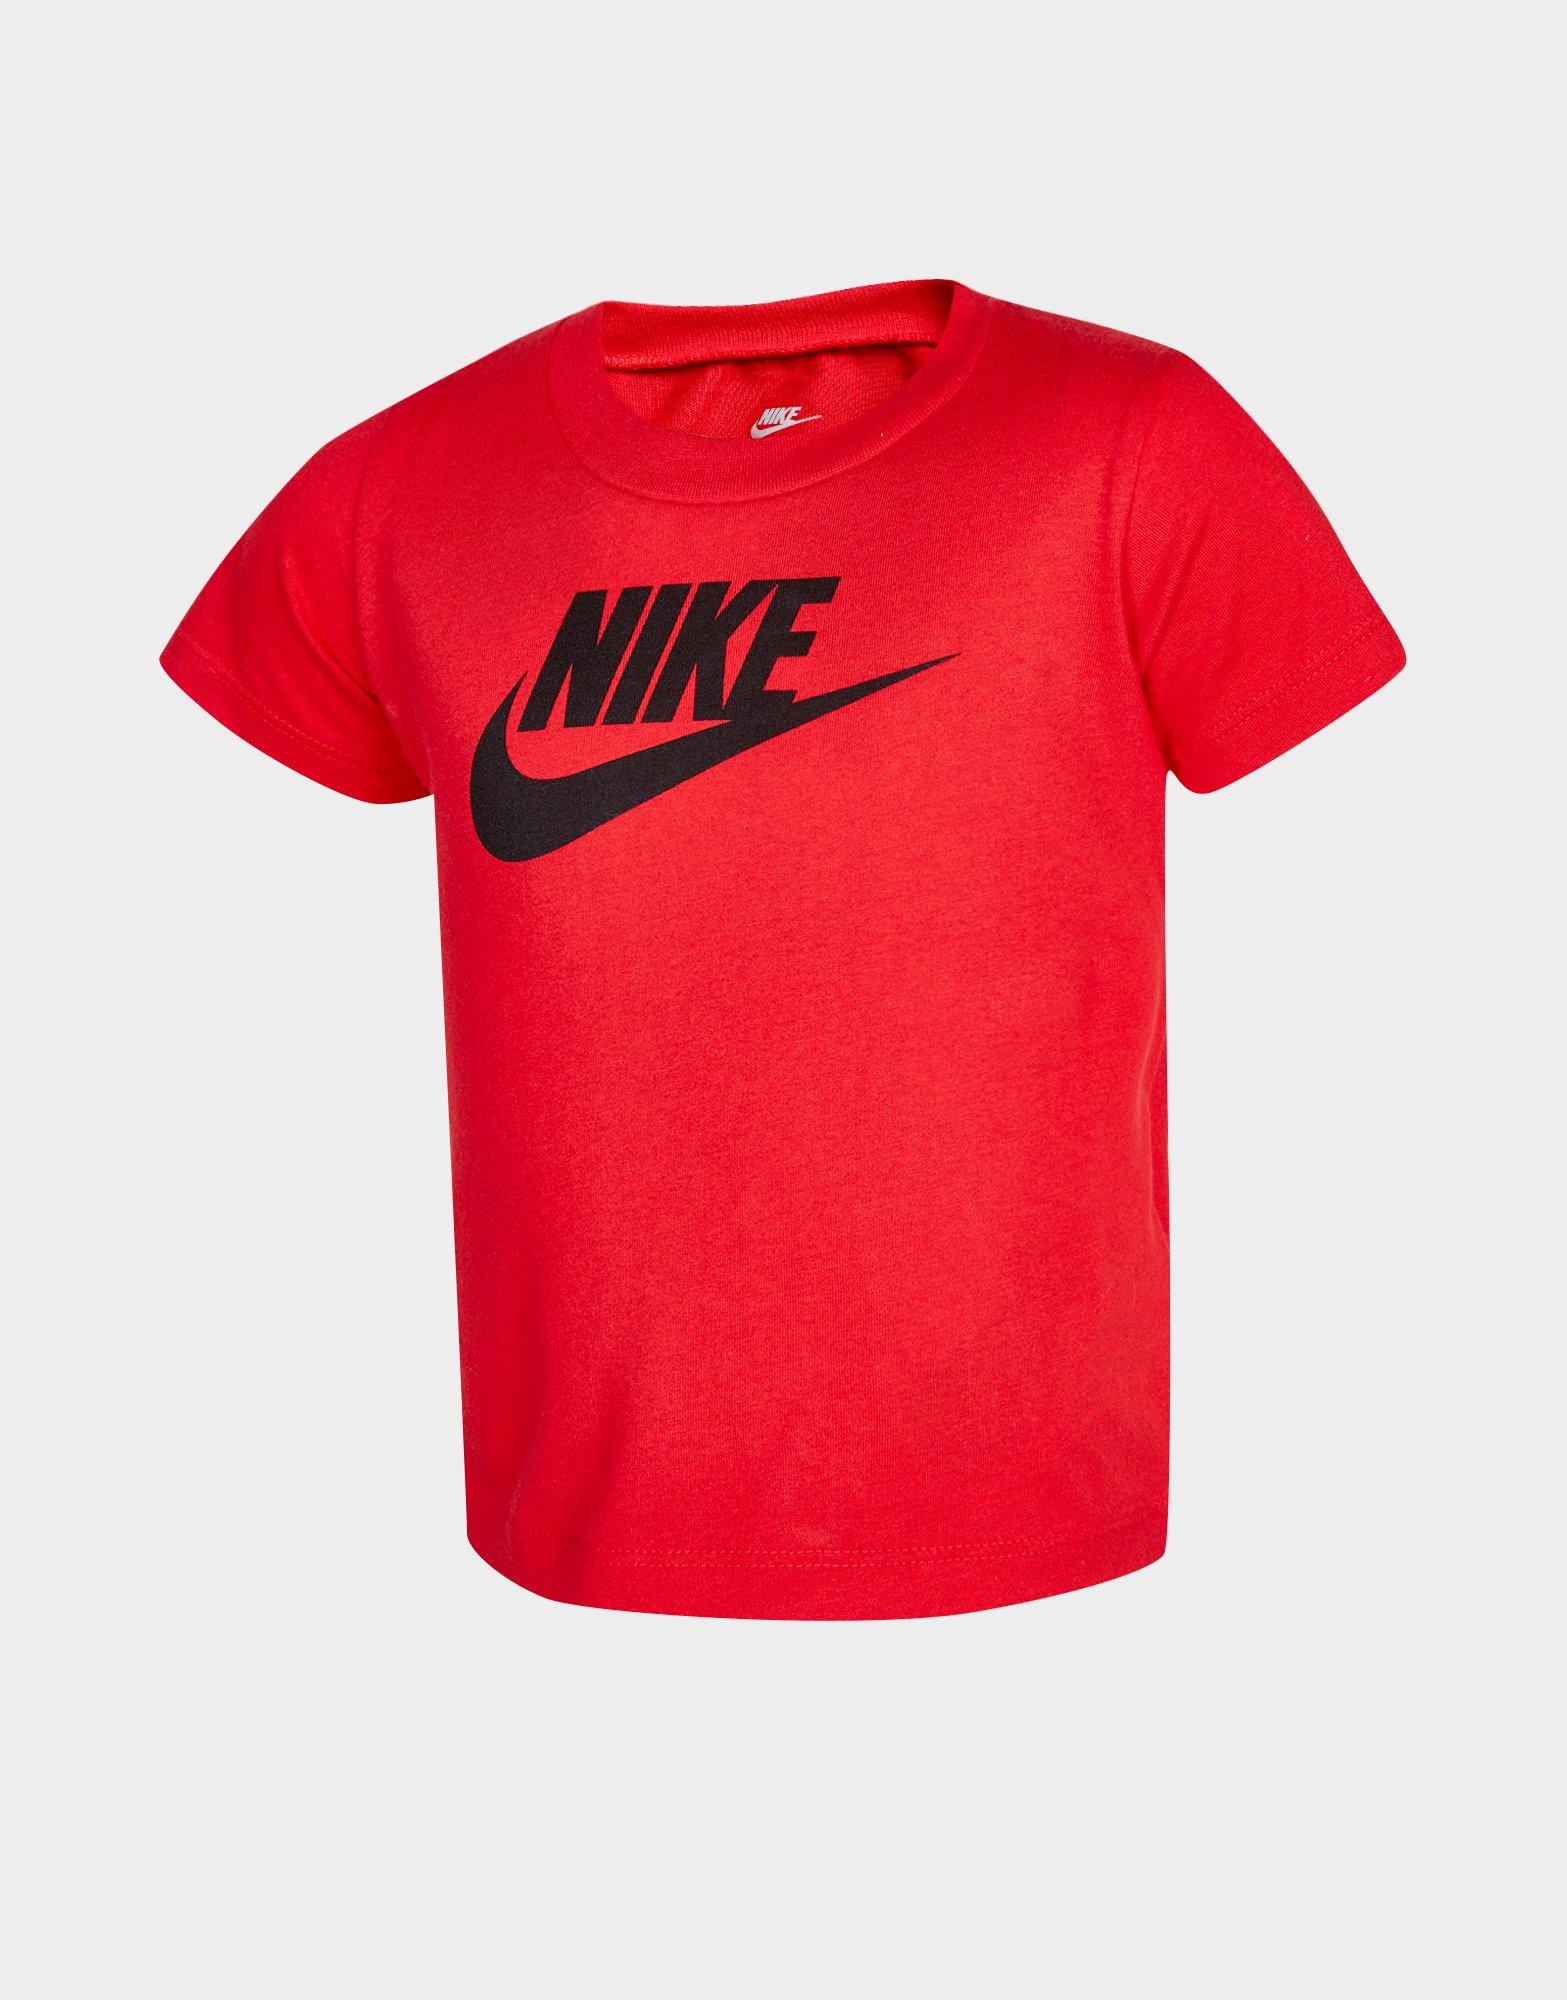 red nike top